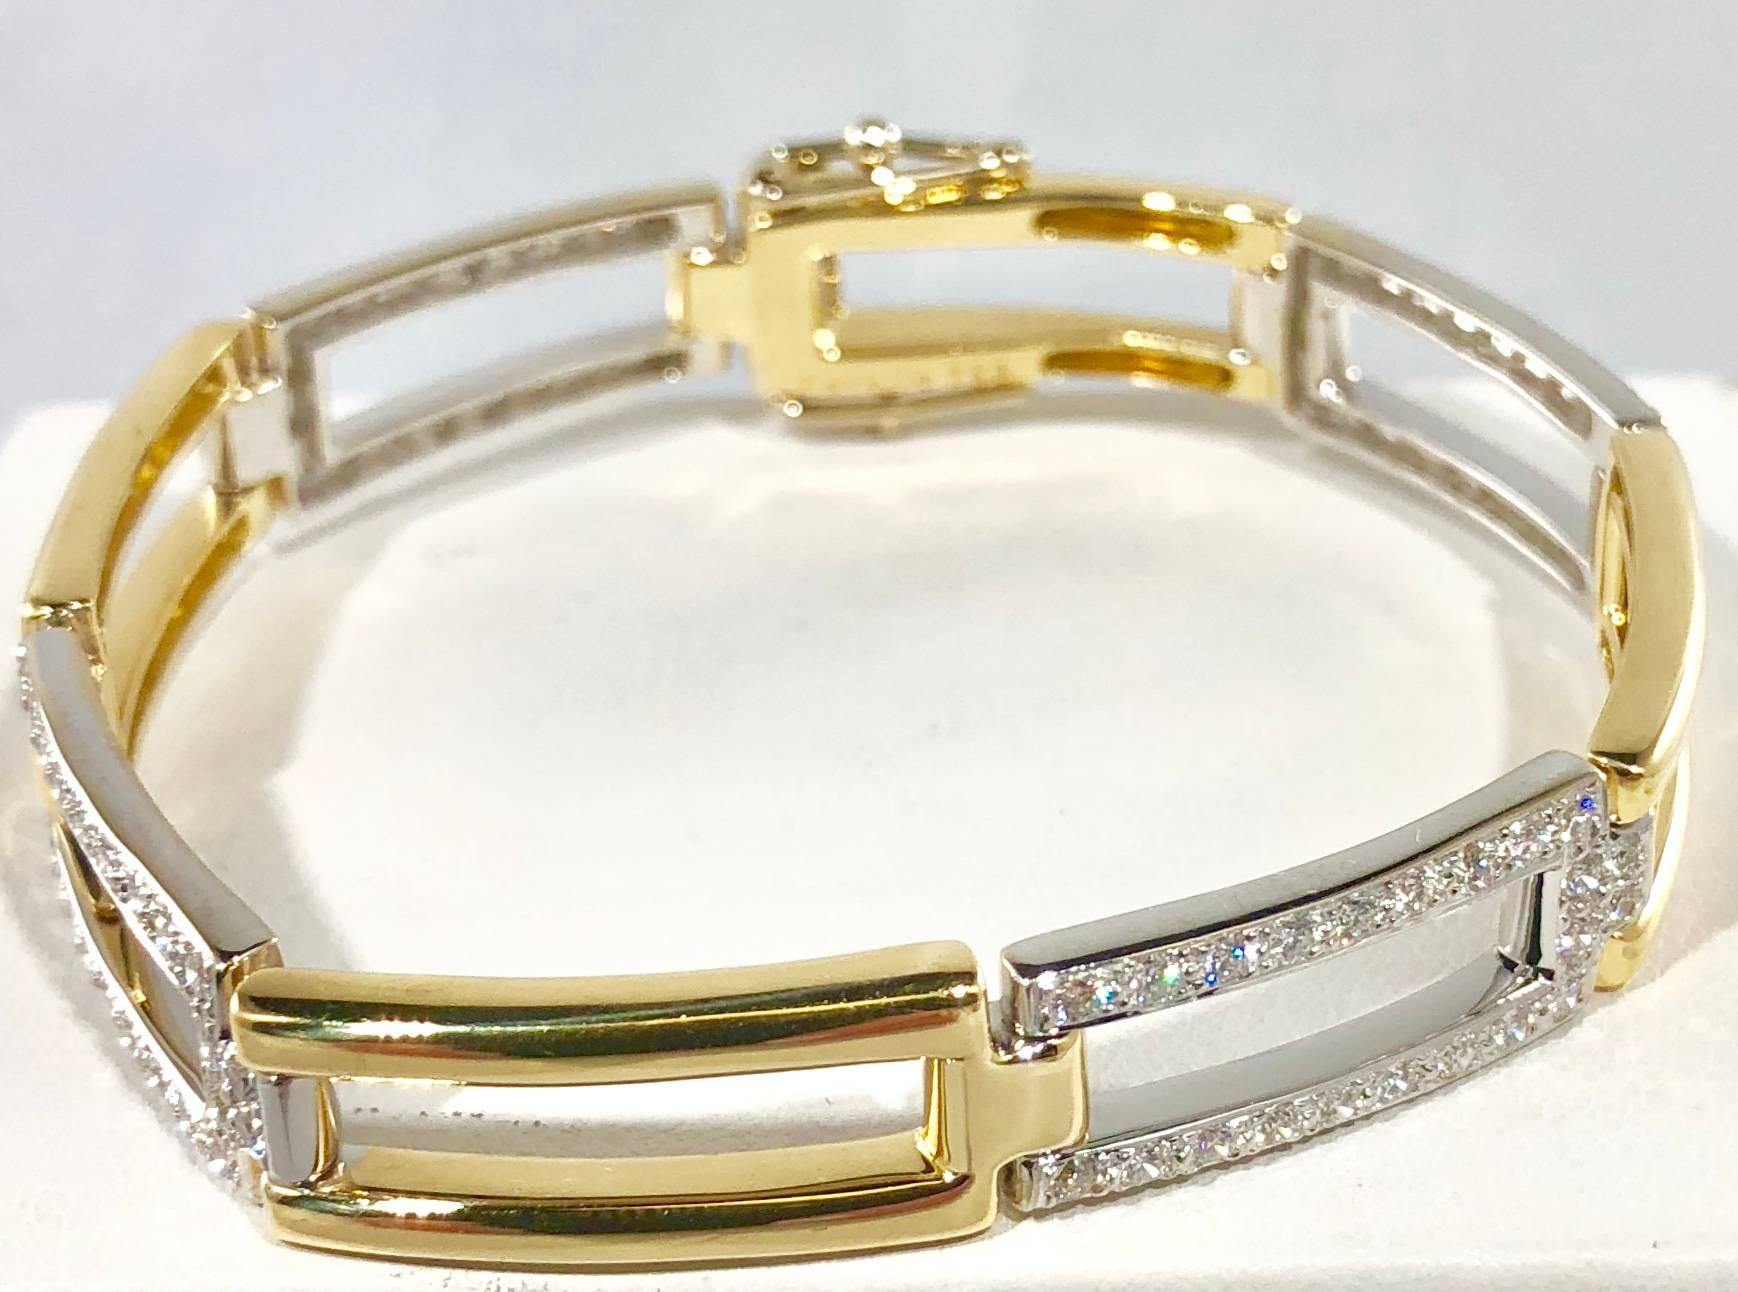 Carelle 18 karat two tone yellow and white gold and diamond bracelet. This piece sparkles with 88 full cut round diamonds equaling 1.73 carats total weight, Color F-G, Clarity VS1. Gold weight is 29.5 grams/ 19.0 dwt. length is 7 inches and 3/8 inch